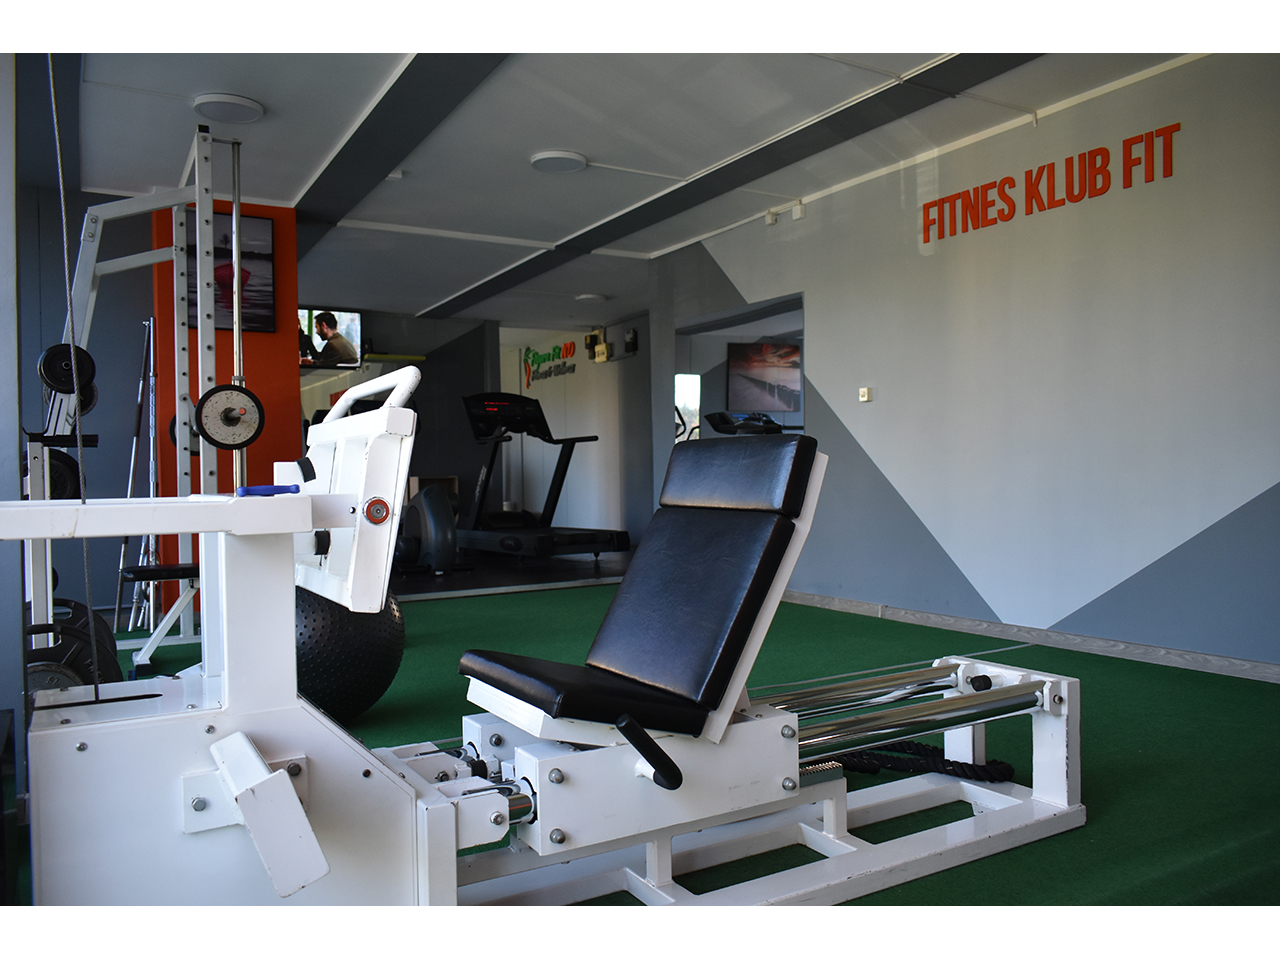 Photo 5 - FITNESS CLUB FIT N Gyms, fitness Belgrade